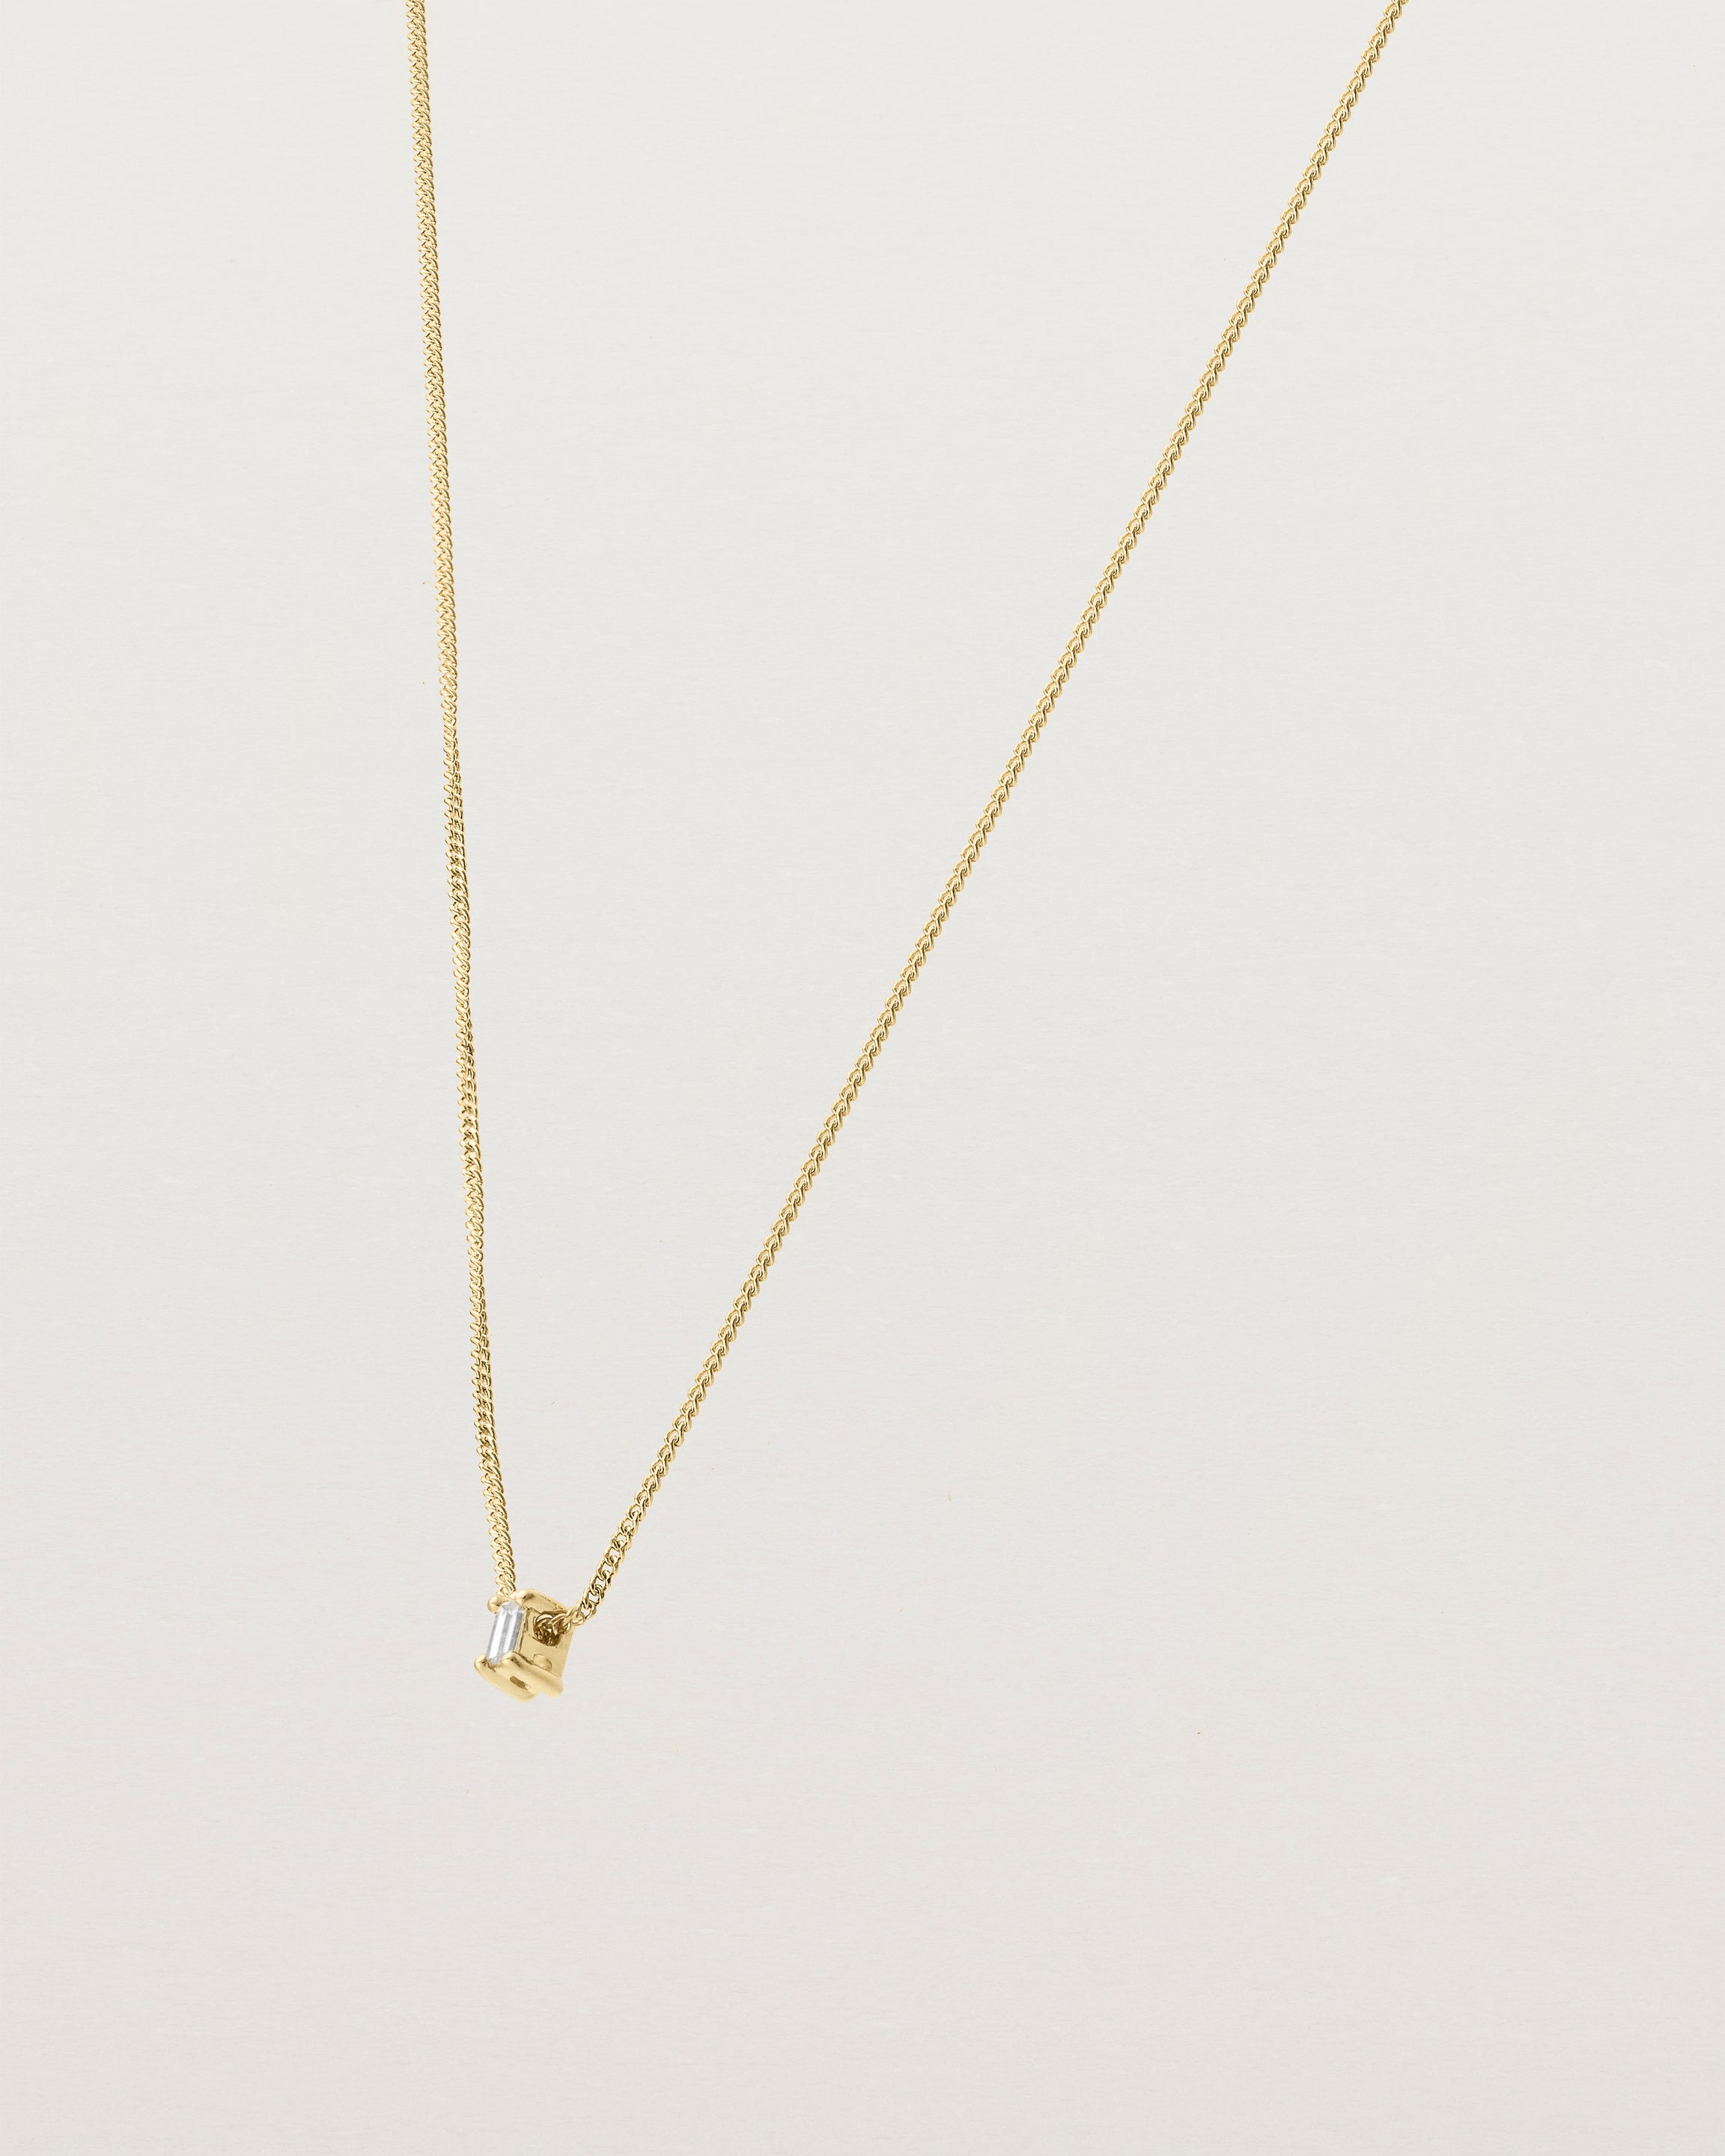 Angled Sena Slider Necklace with White Diamond in yellow gold.